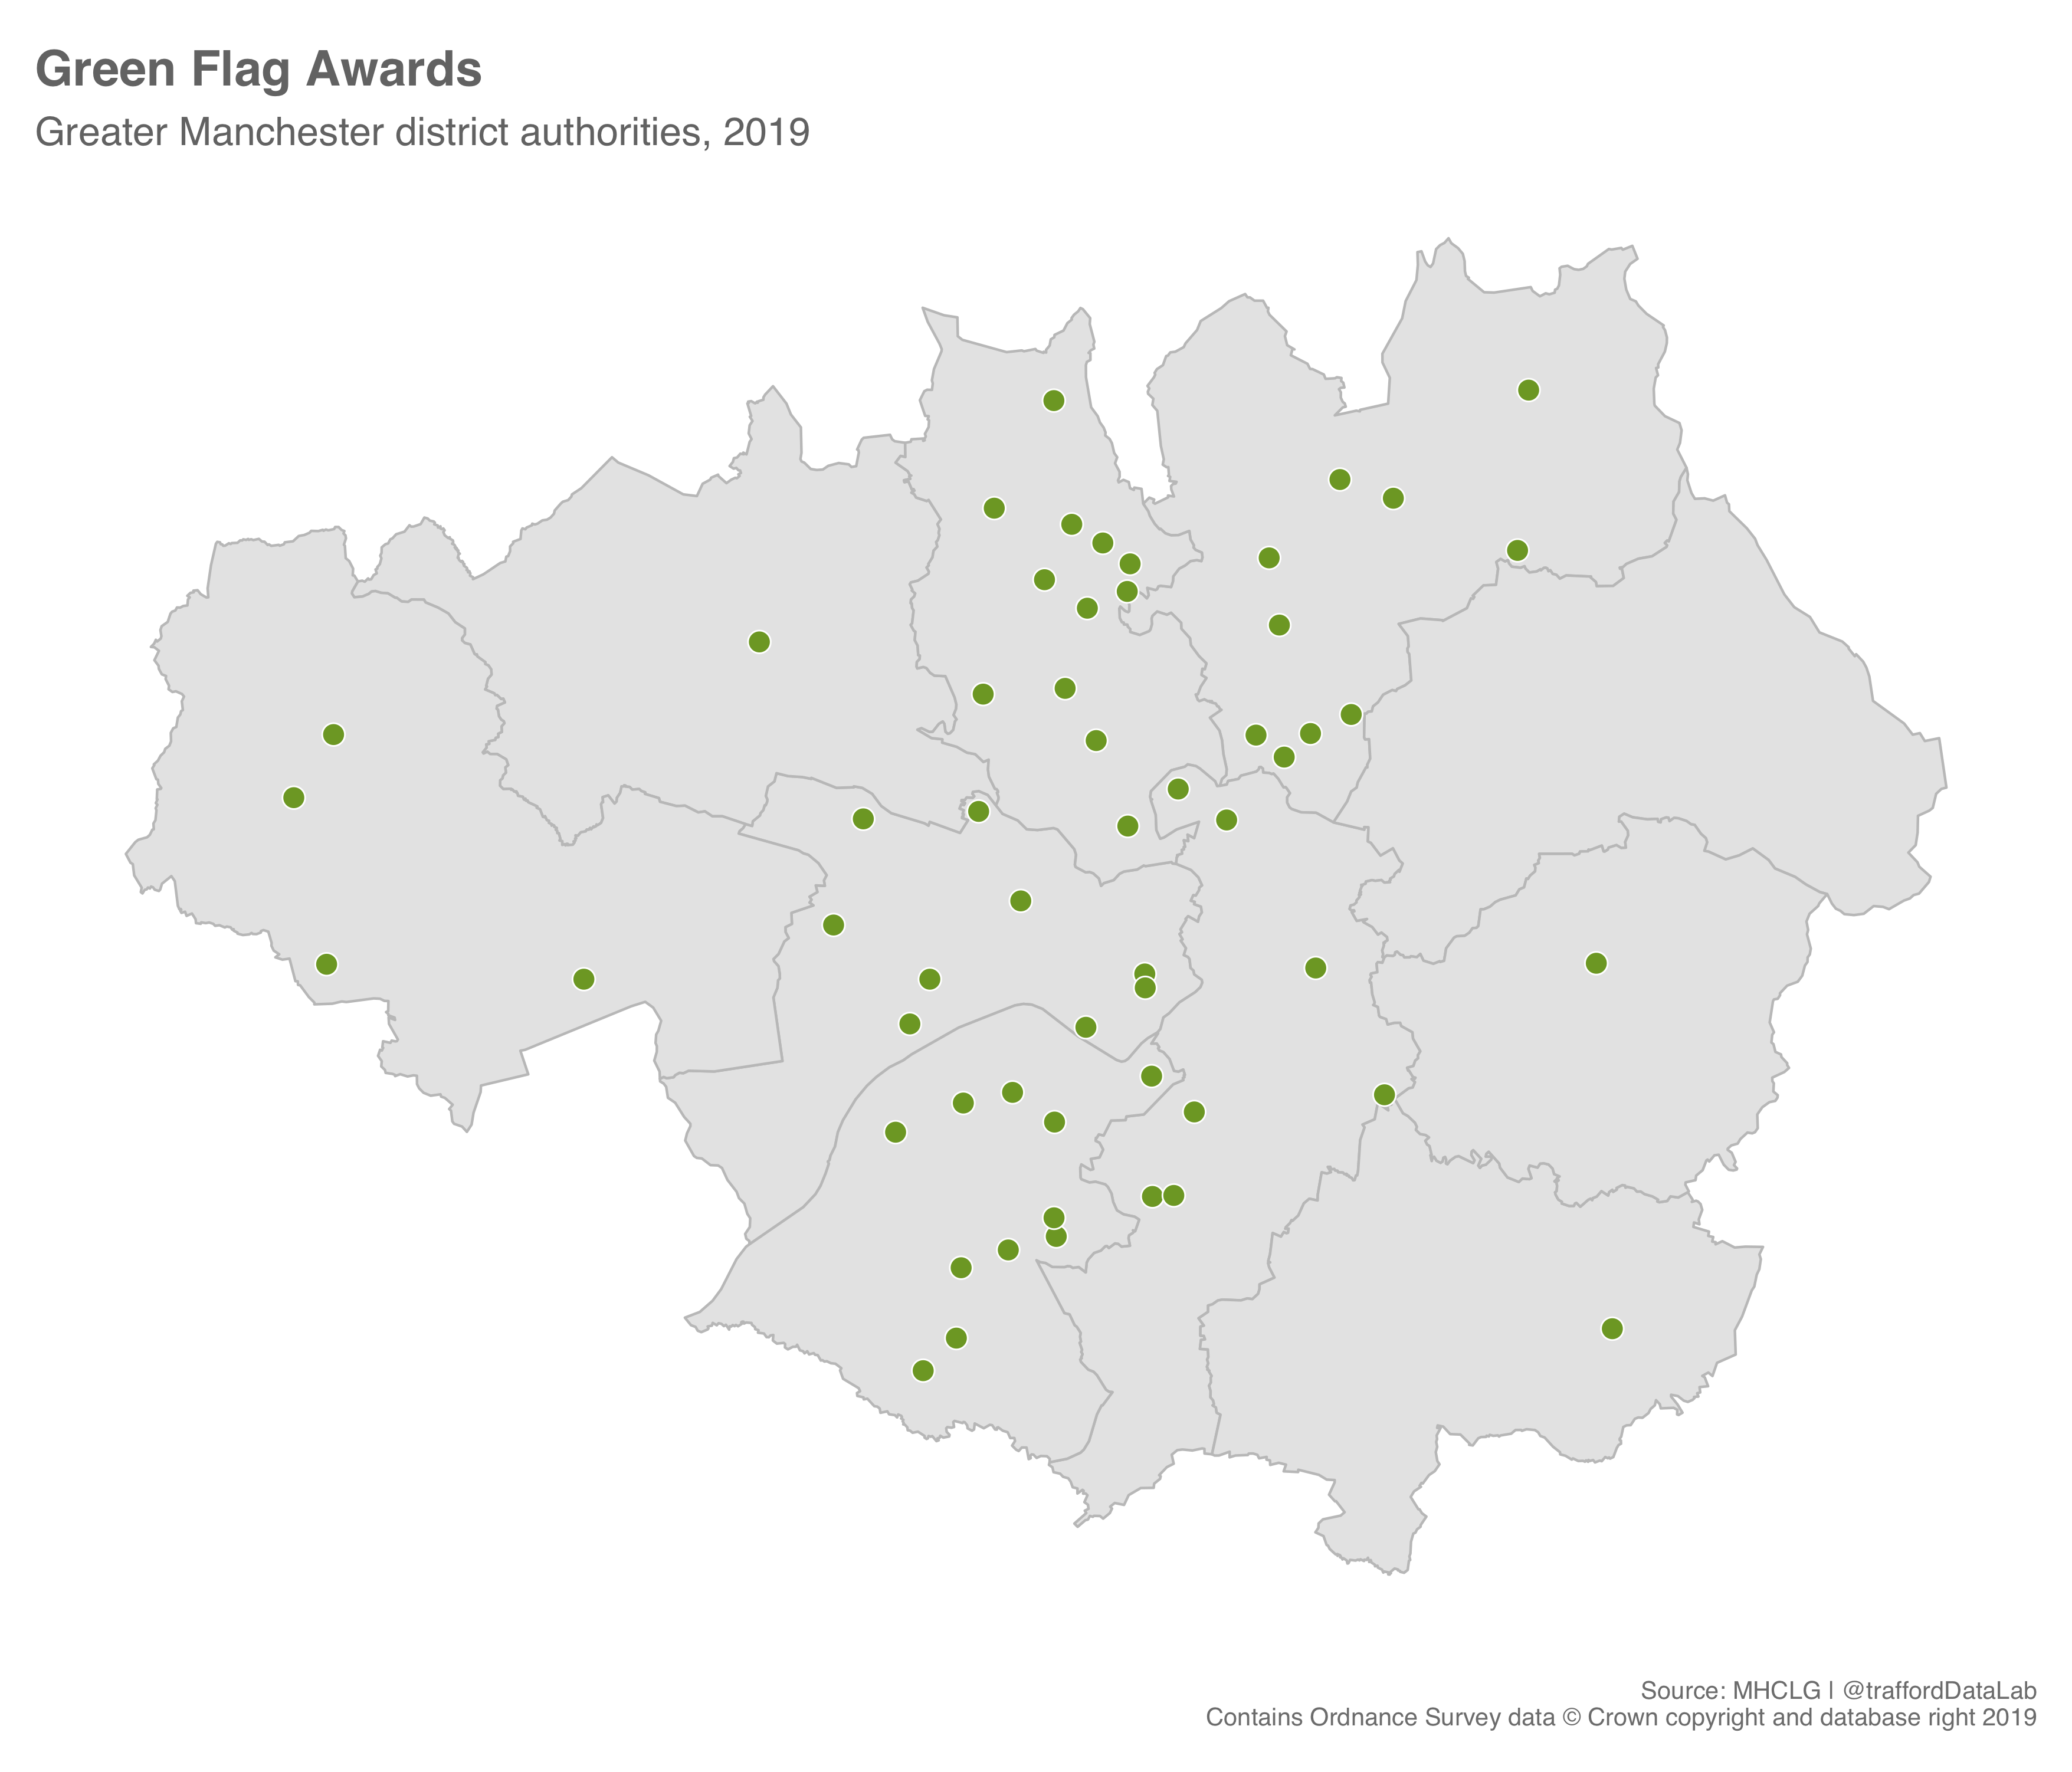 Greater Manchester region with Local Authority boundaries showing Green Flag Award locations.